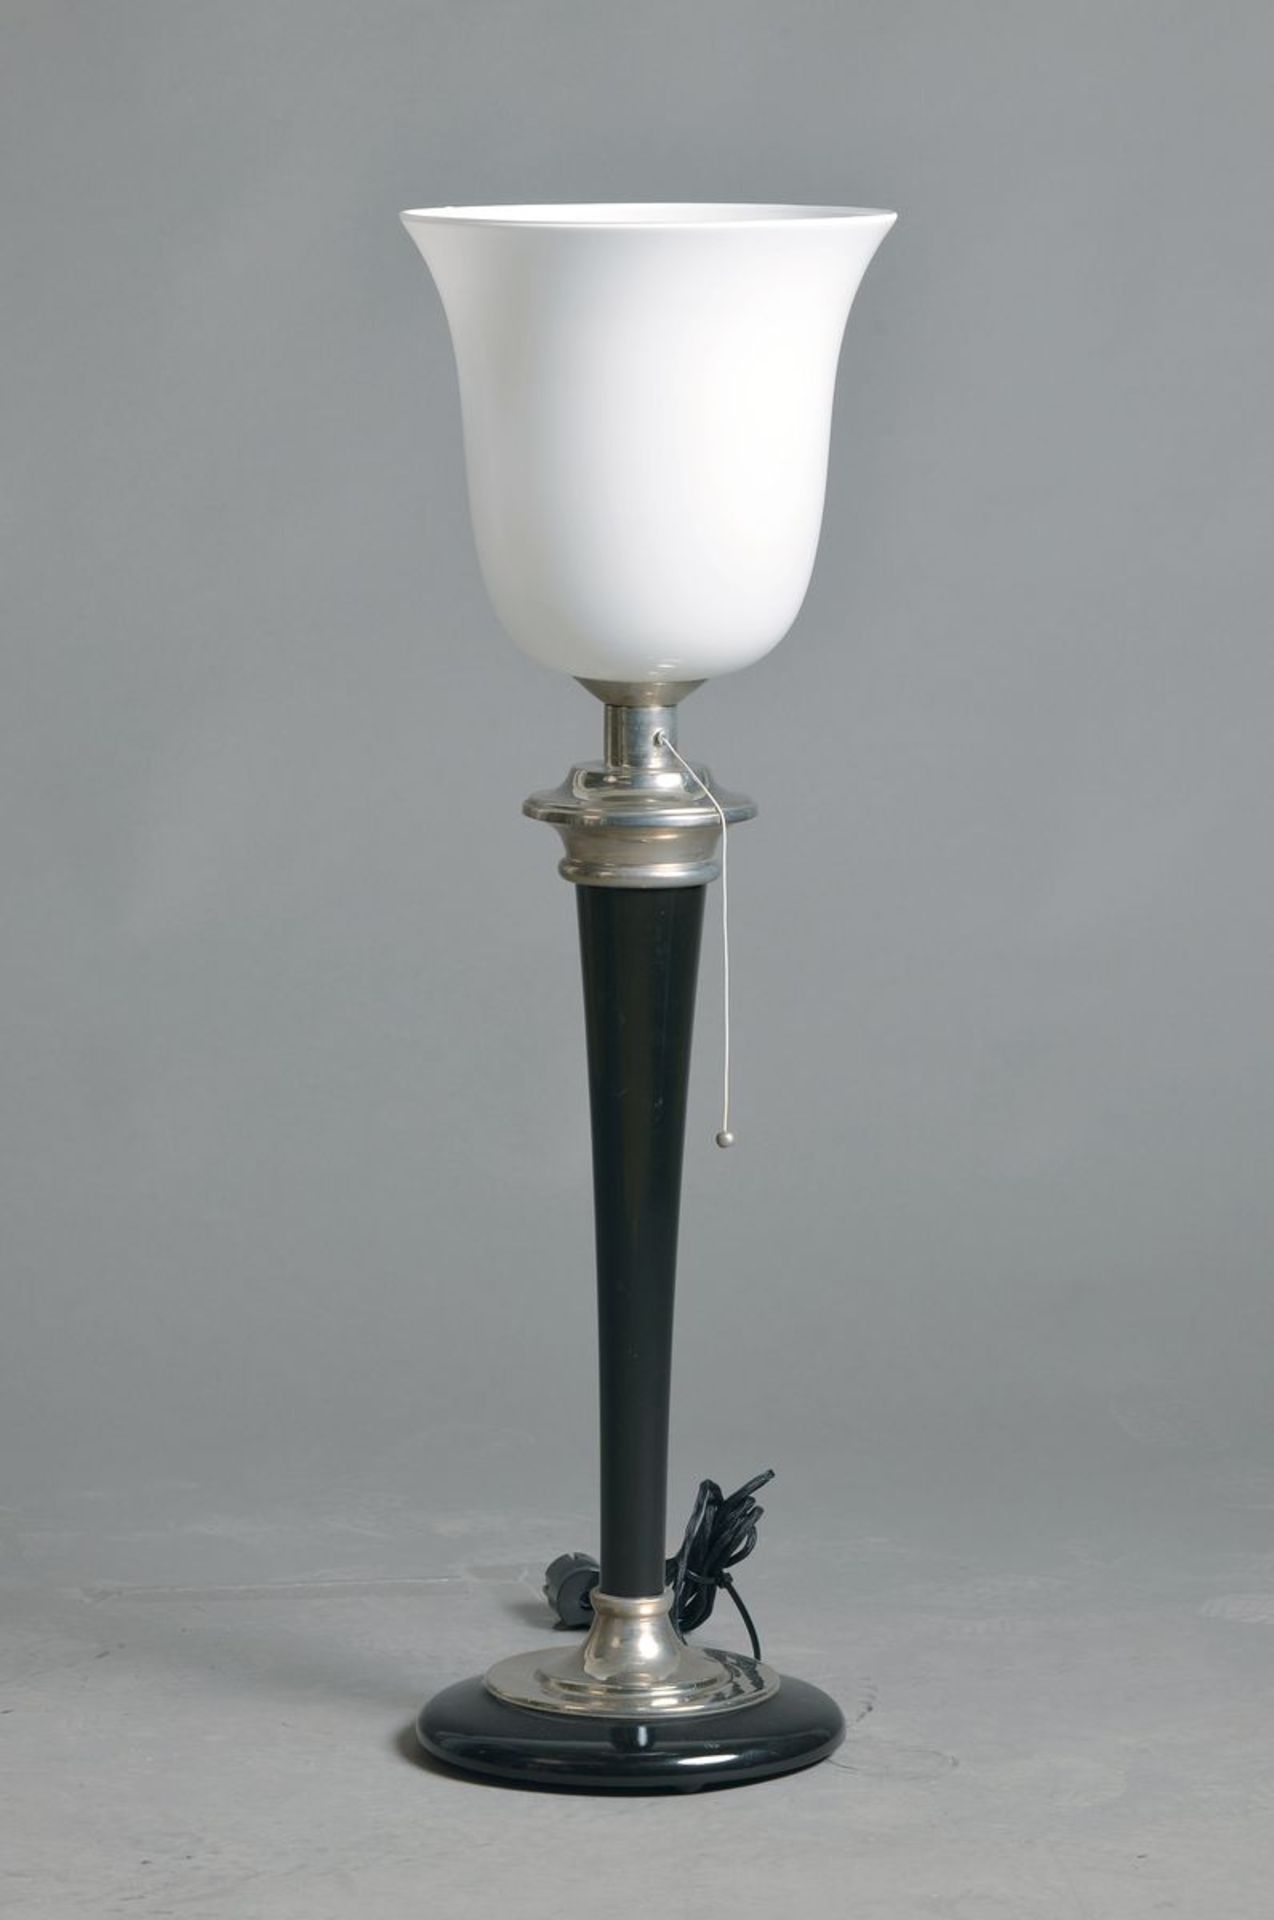 Mazda-lamp, in style of the 1930s, black wooden foot with chrome plated appliqués, opaline glass